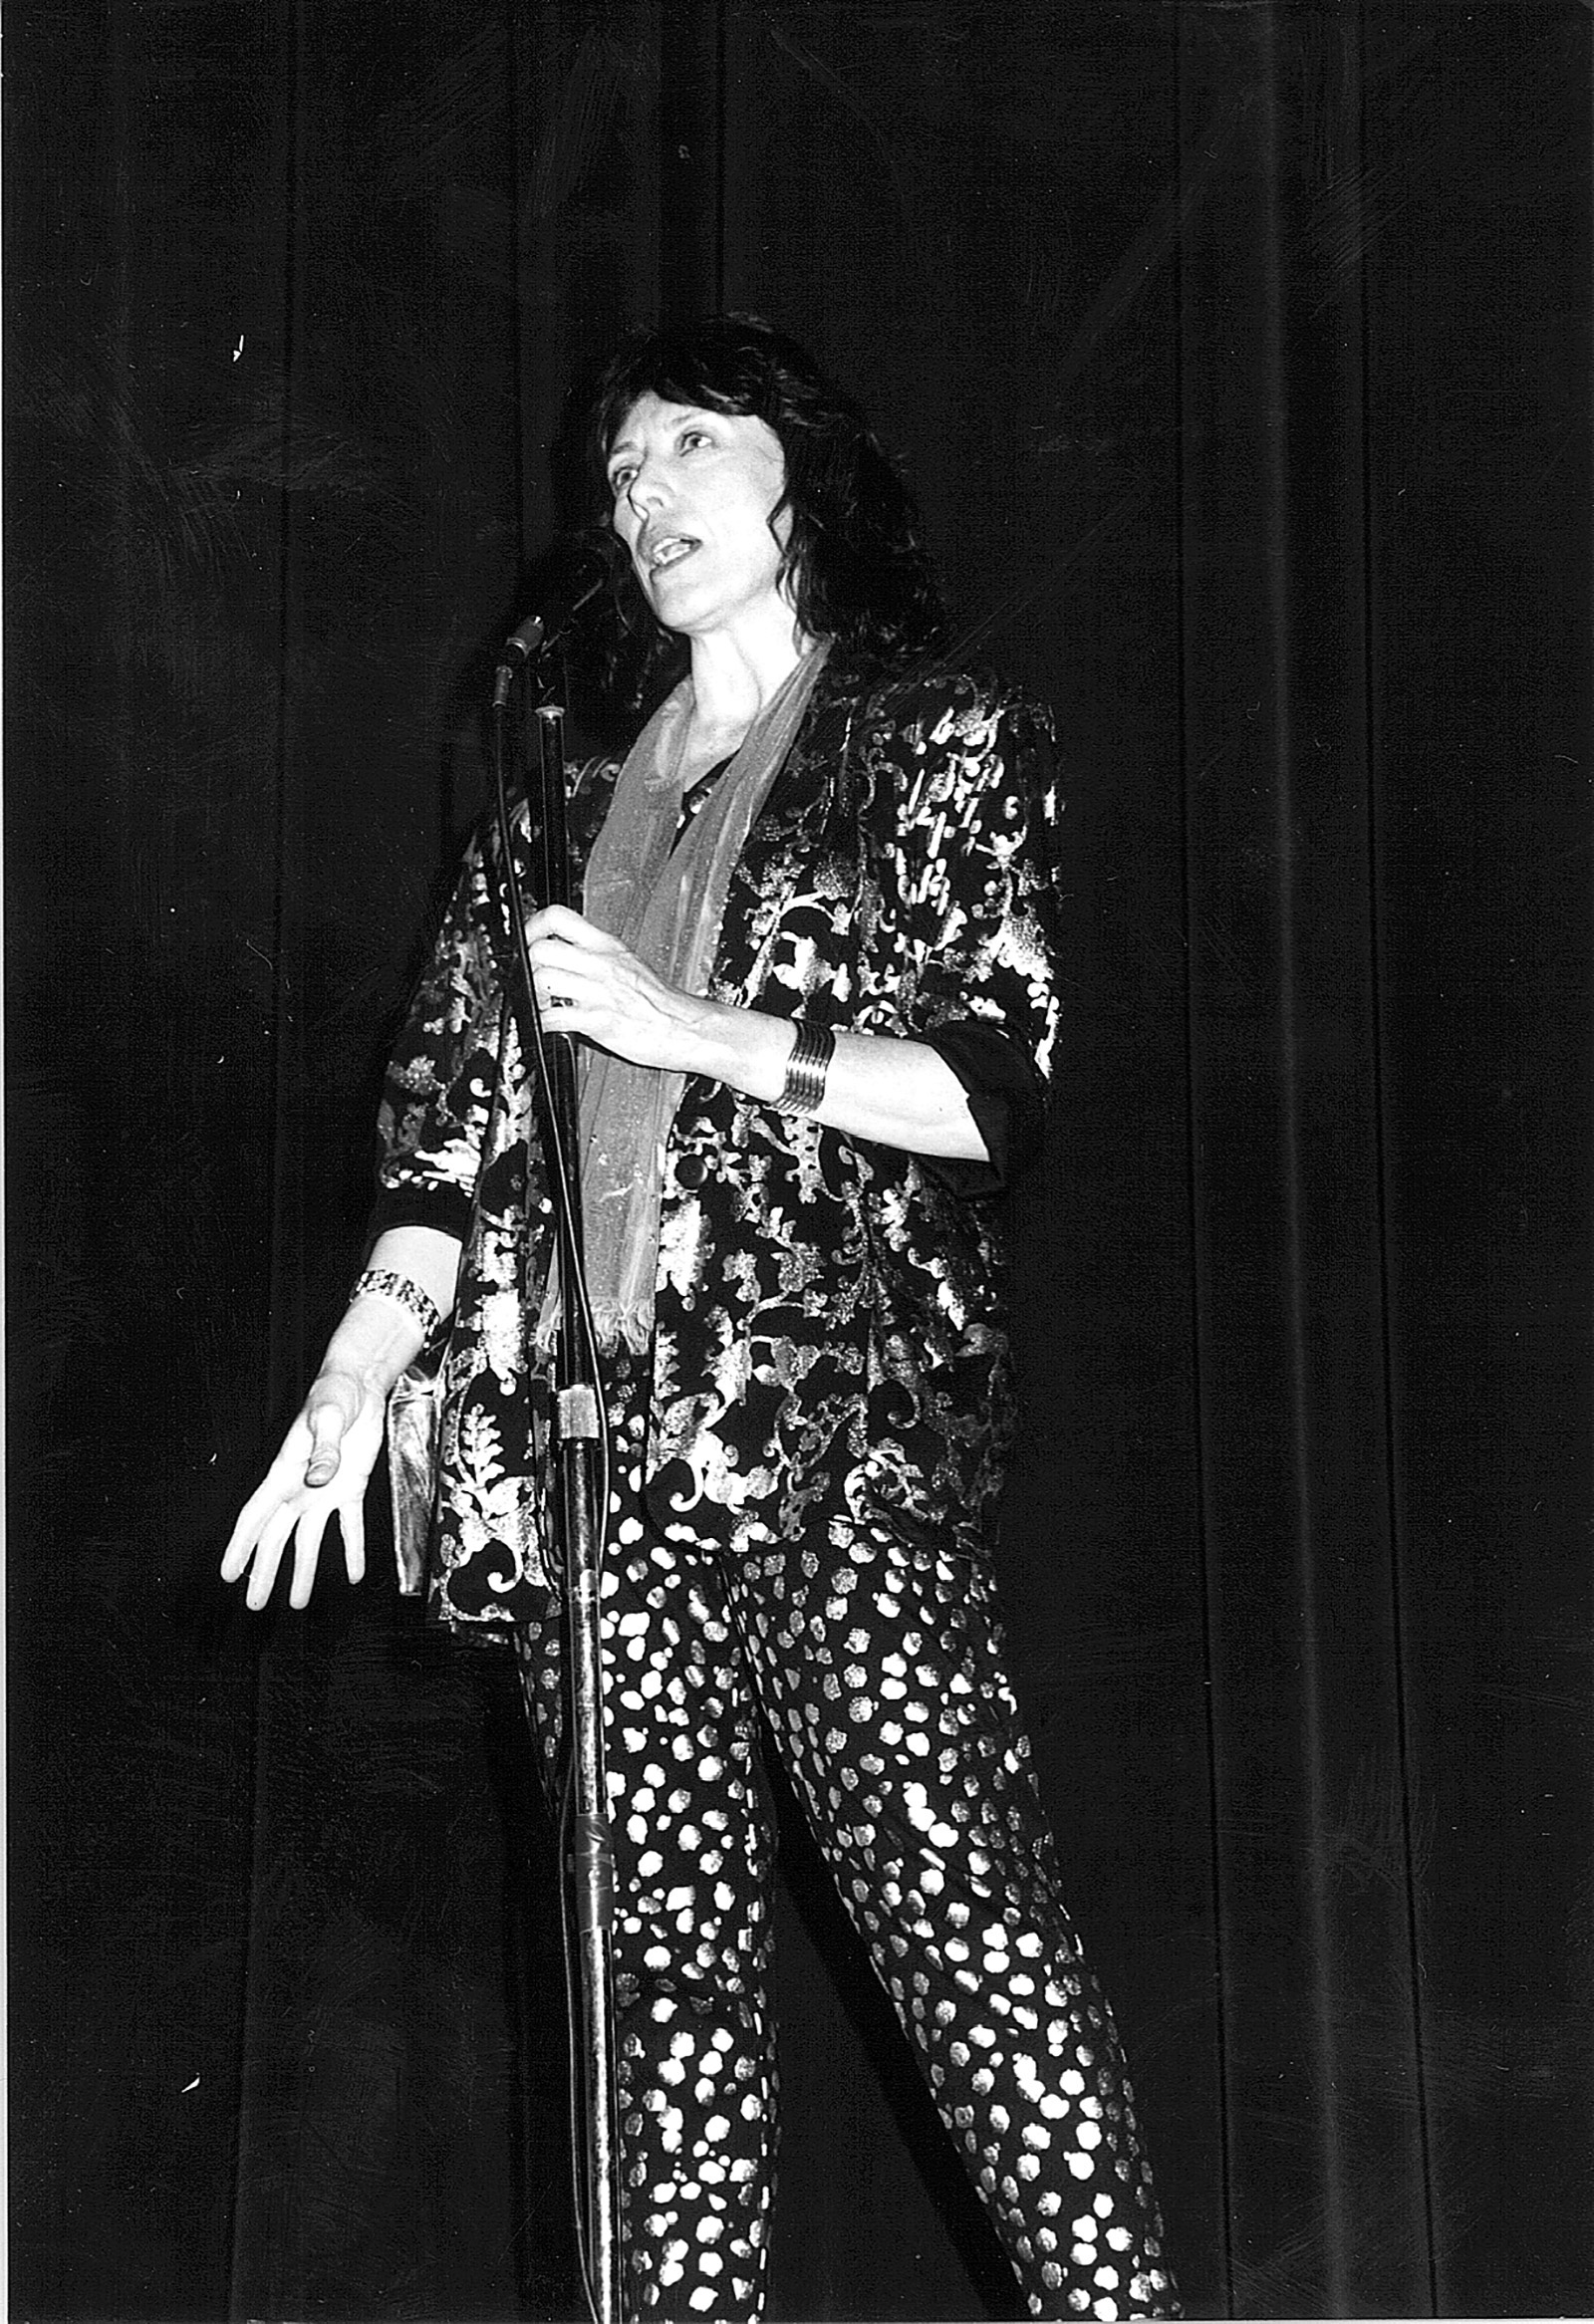 Lily Tomlin accepting the Golden Space Needle Audience Award for Best Actress for her film, Search for Signs of Intelligent Life in the Universe